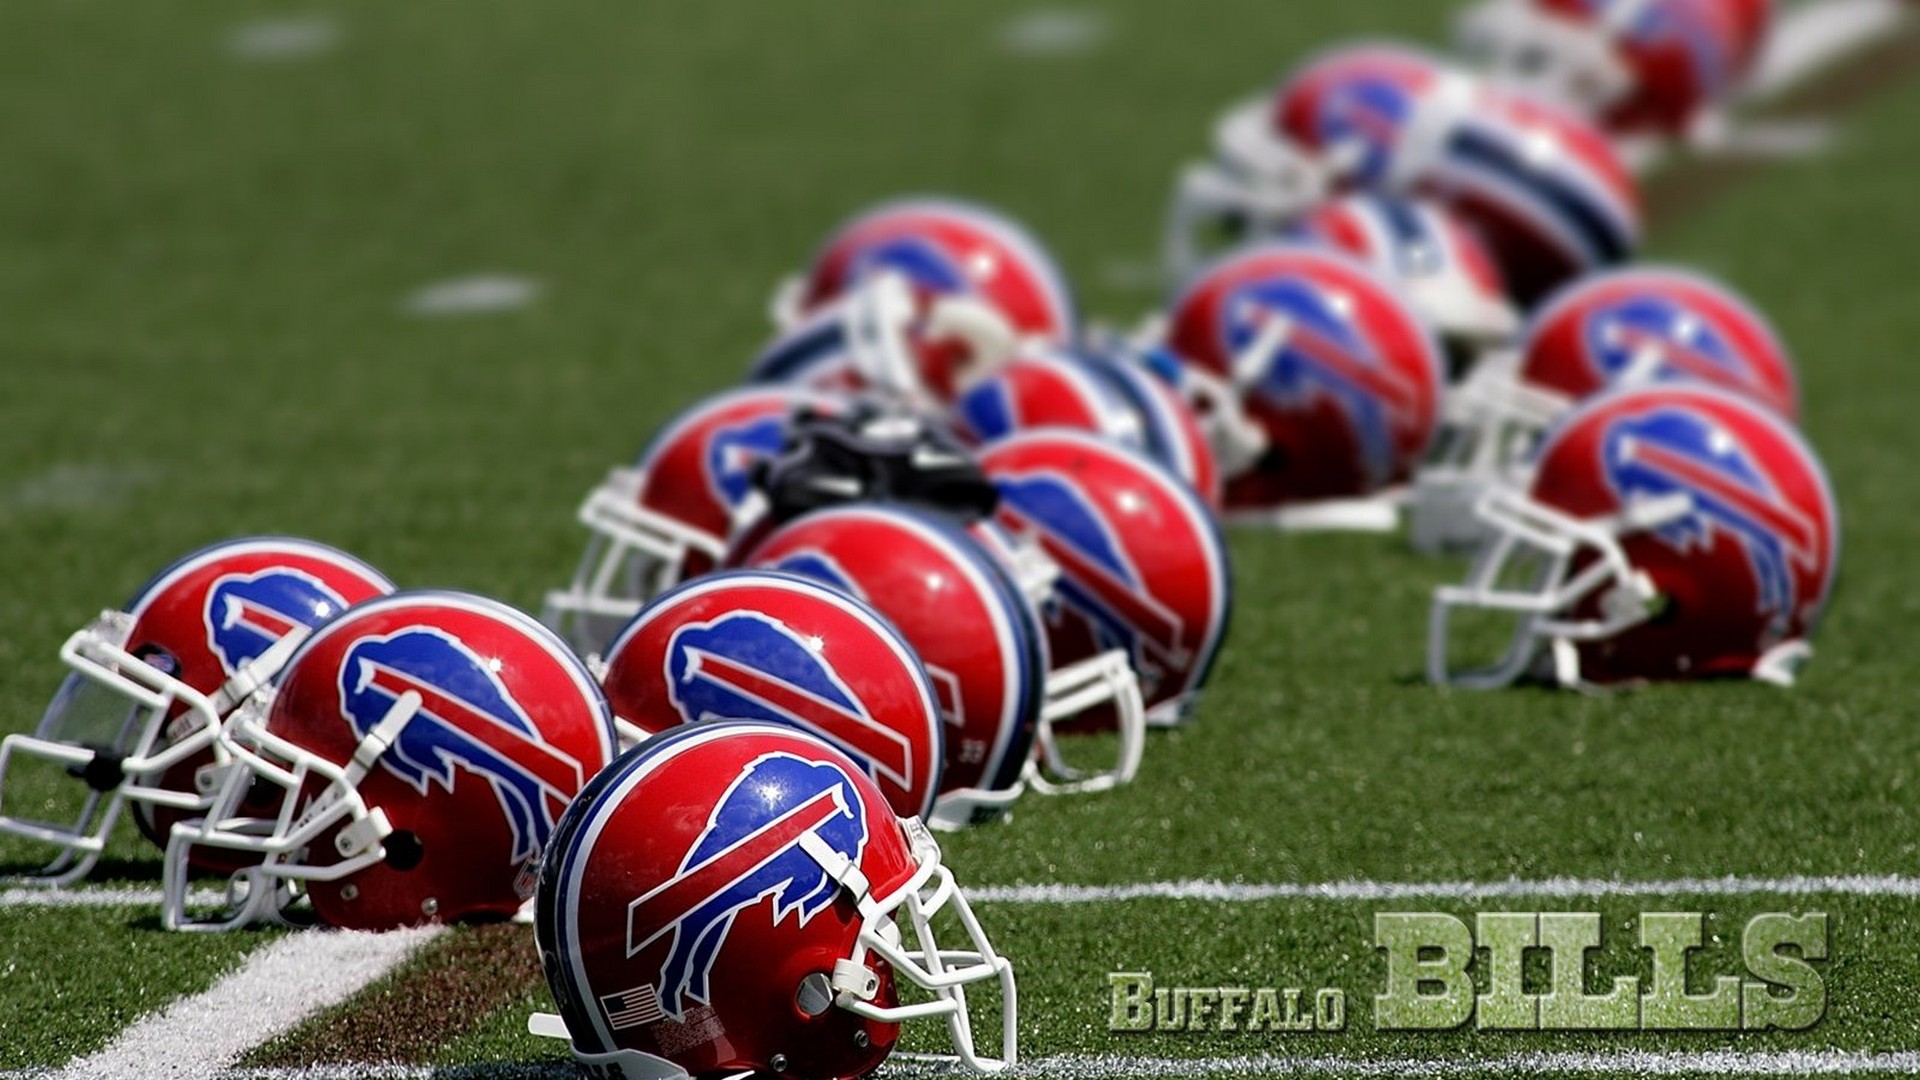 Buffalo Bills NFL For Desktop Wallpaper with high-resolution 1920x1080 pixel. You can use this wallpaper for your Mac or Windows Desktop Background, iPhone, Android or Tablet and another Smartphone device